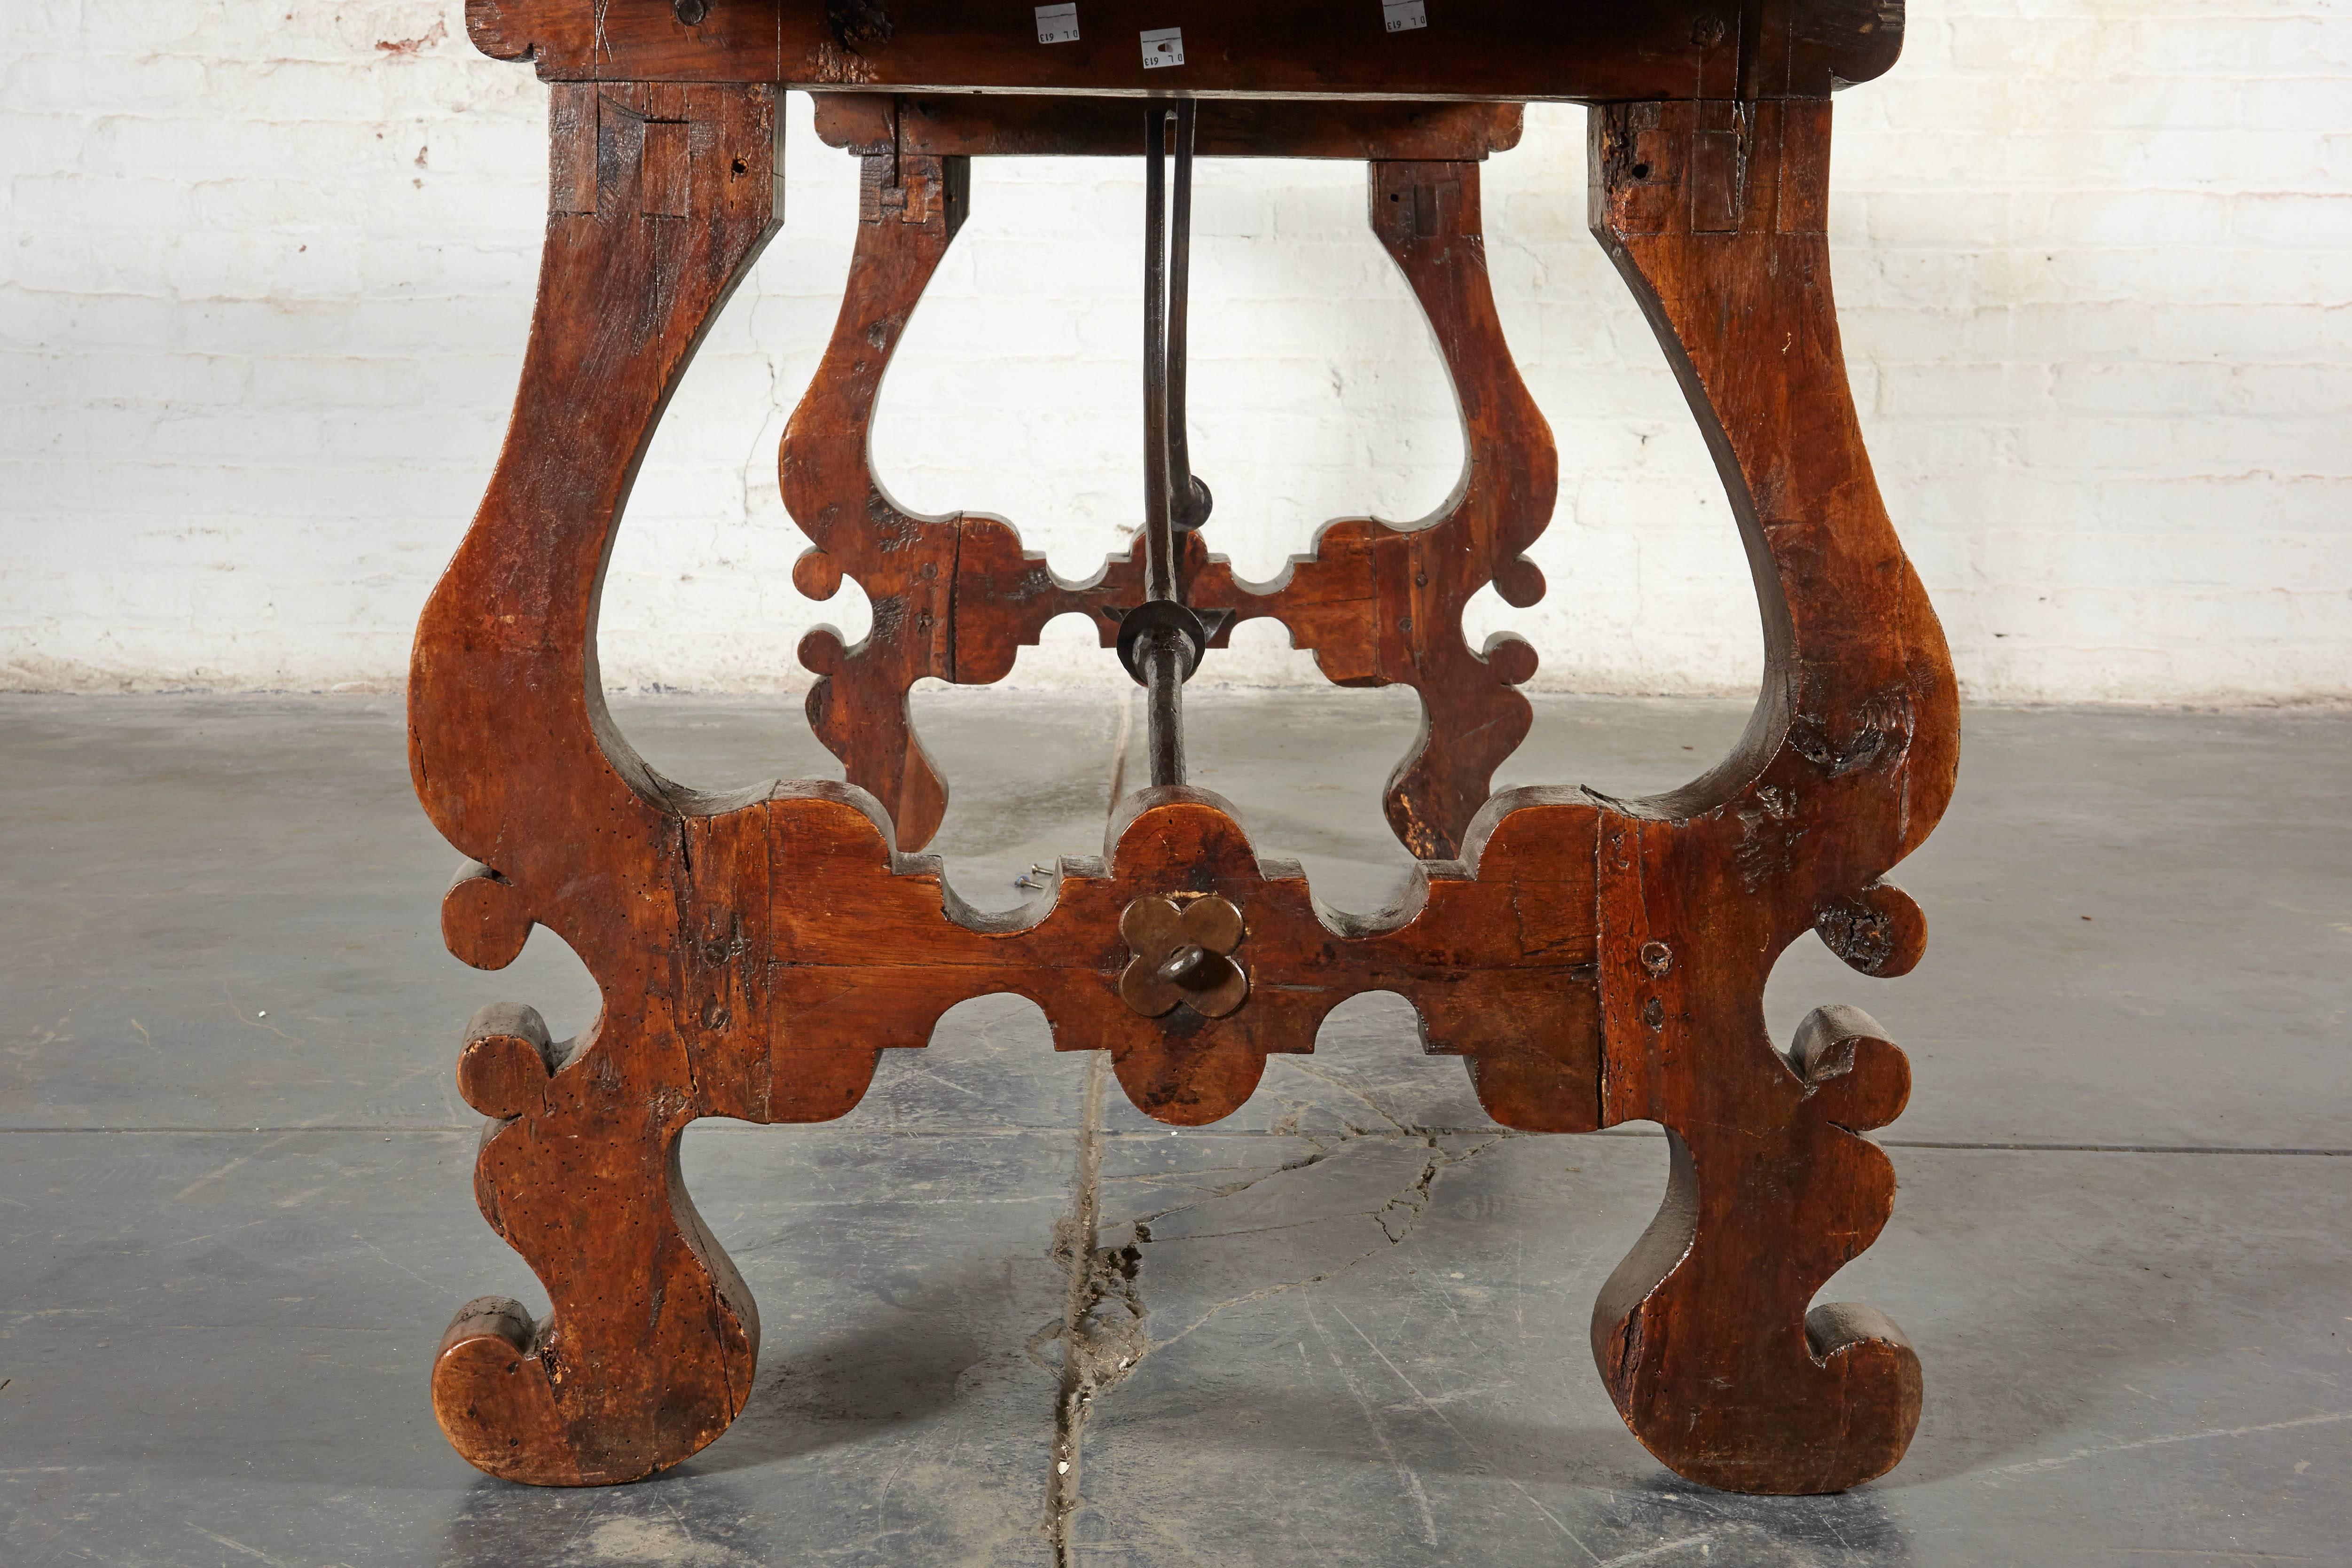 Wrought Iron Spanish Baroque Walnut and Wrought-Iron Refectory Table